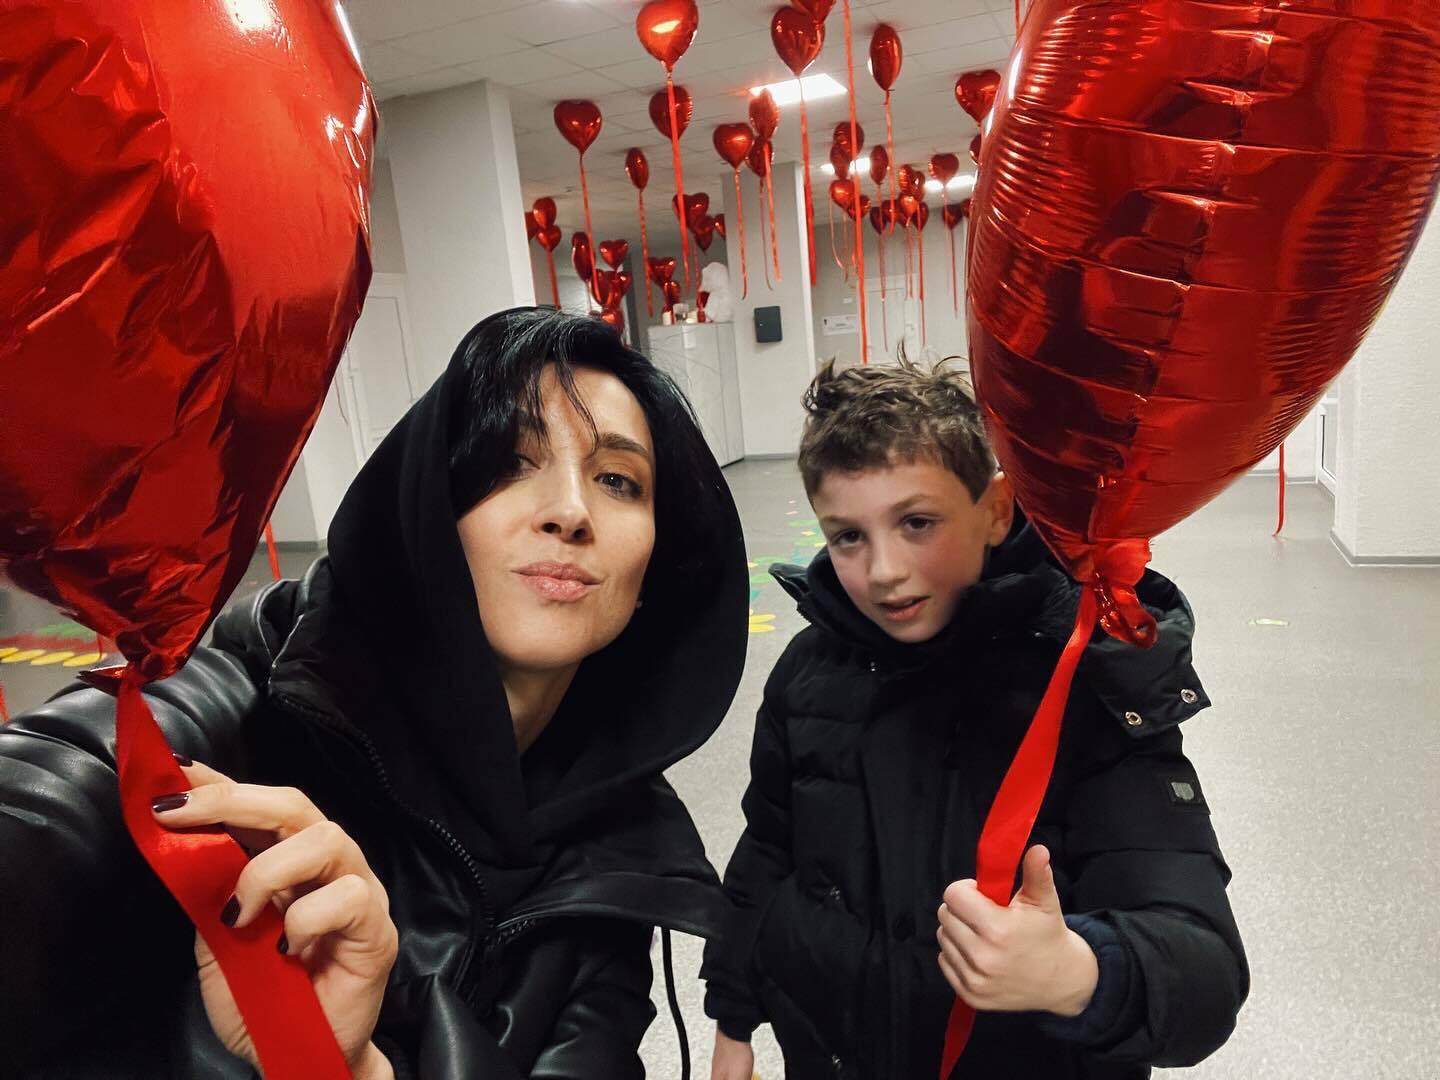 Love is not about flowers and gifts. Bednyakov, Tarabarova, Monroe and other stars showed their ''Valentine'' on February 14